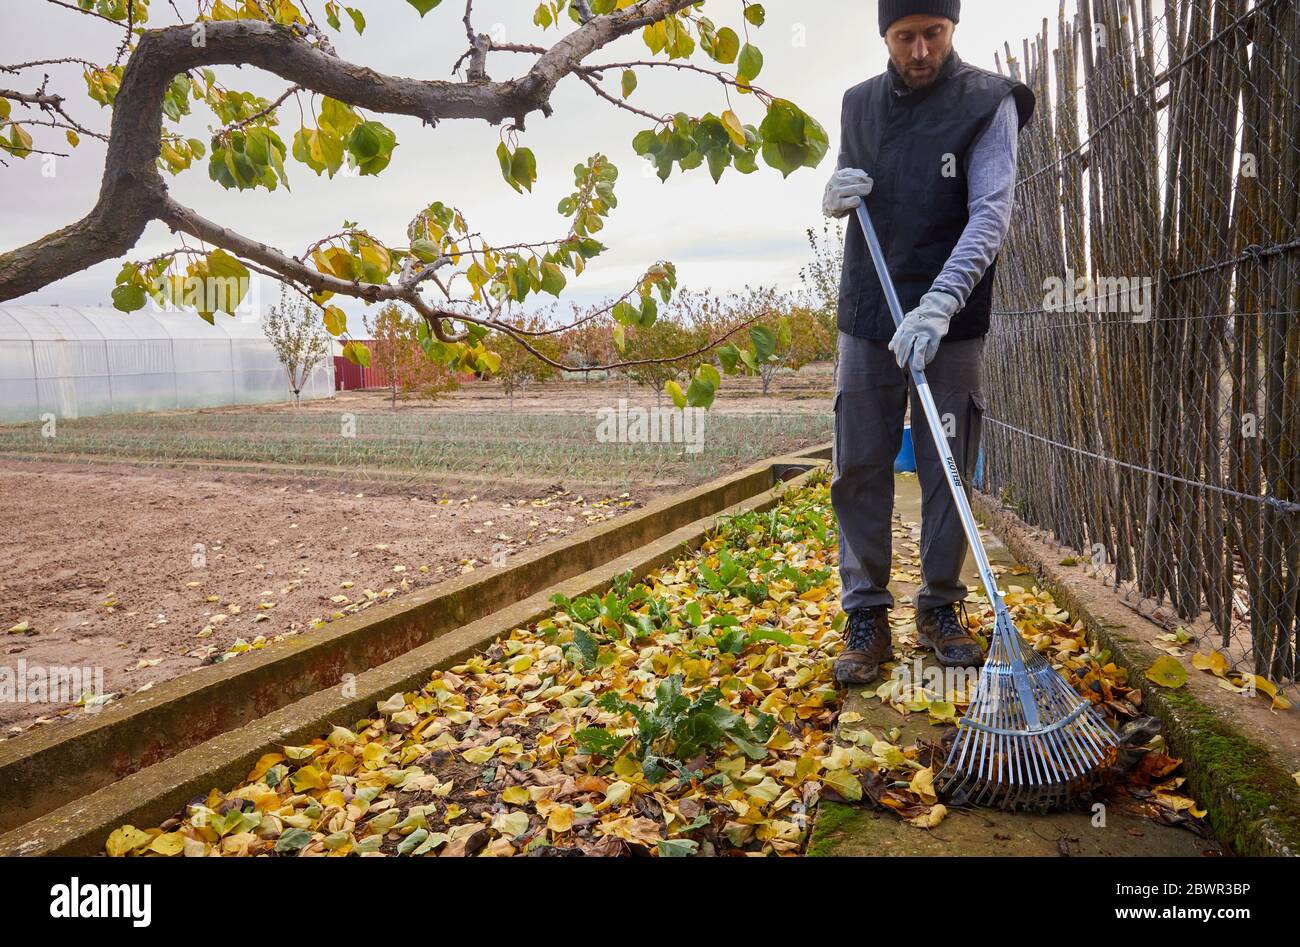 Farmer collecting leaves with a rake, Orchard, Calahorra, La Rioja, Spain, Europe Stock Photo